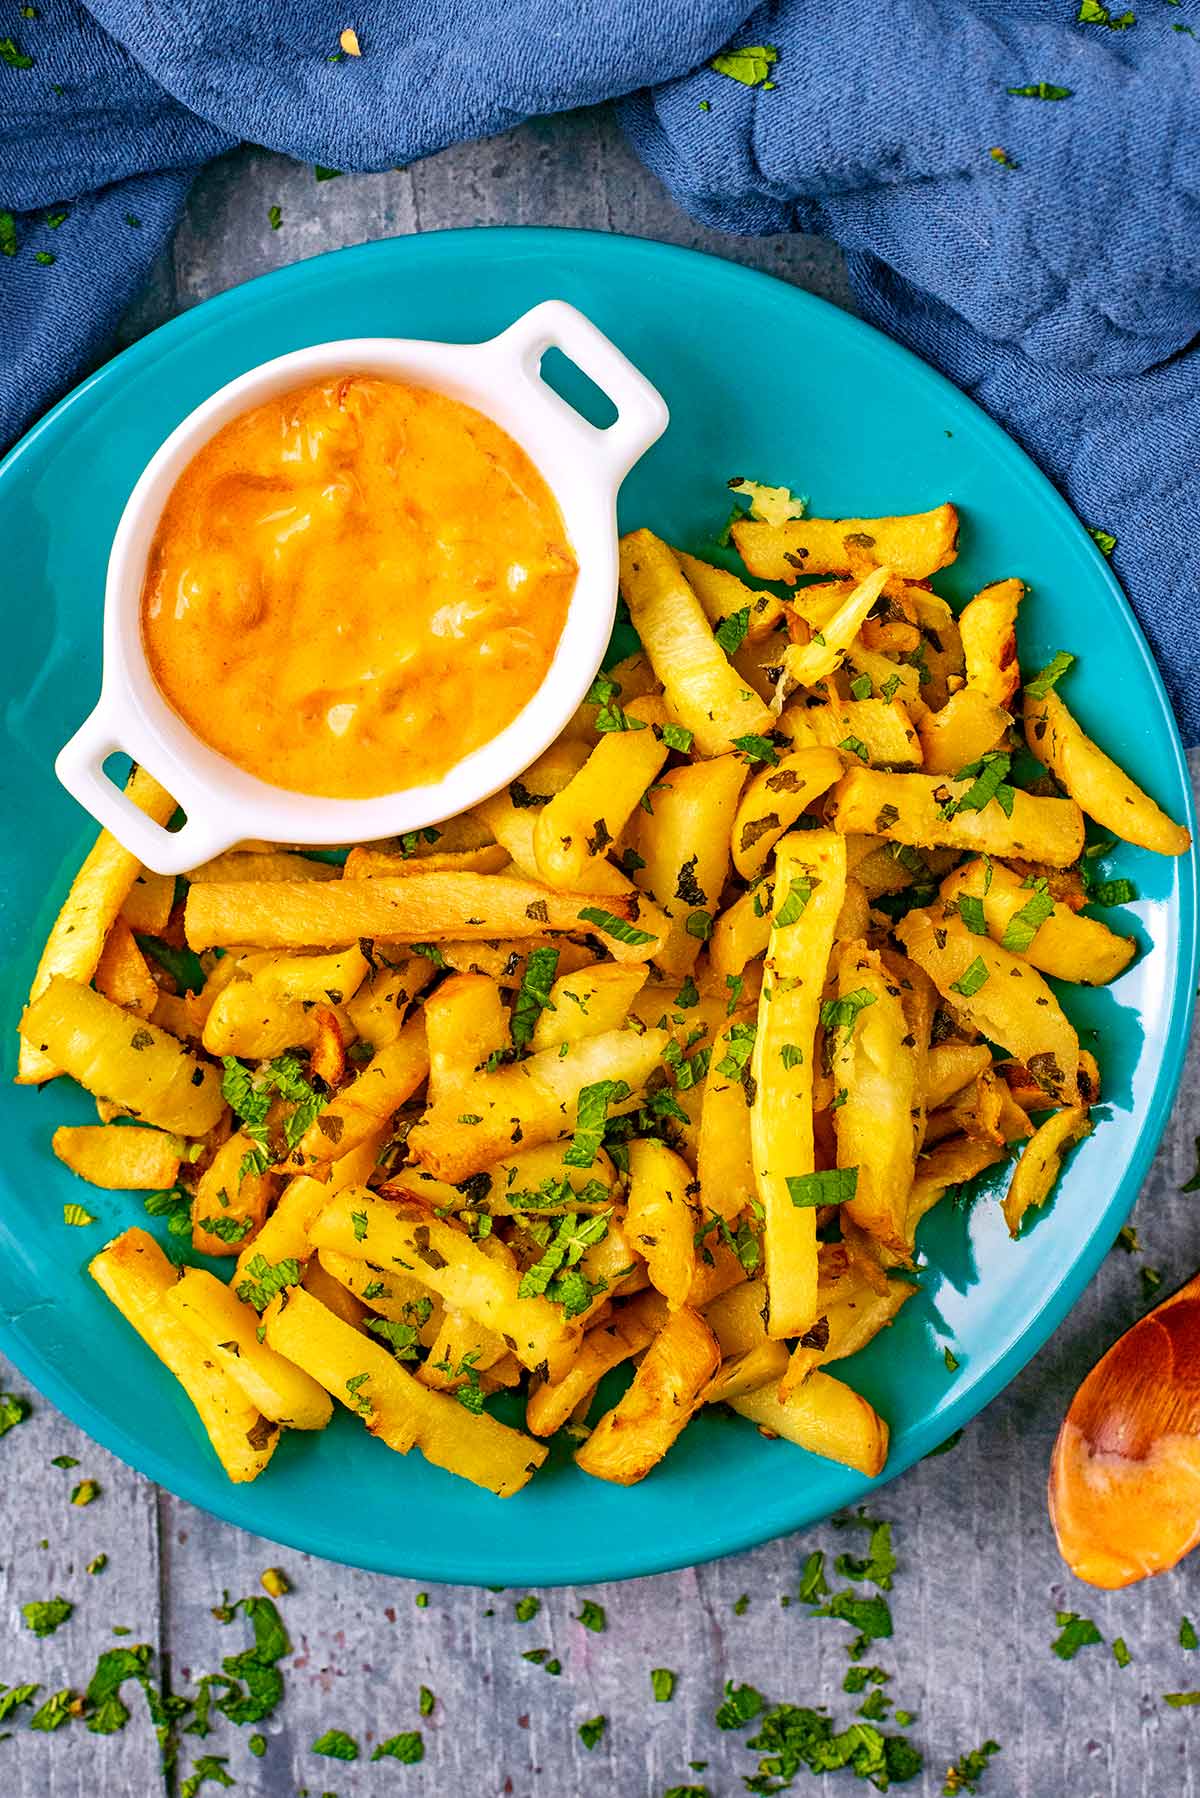 Baked Parsnip Fries on a blue plate.